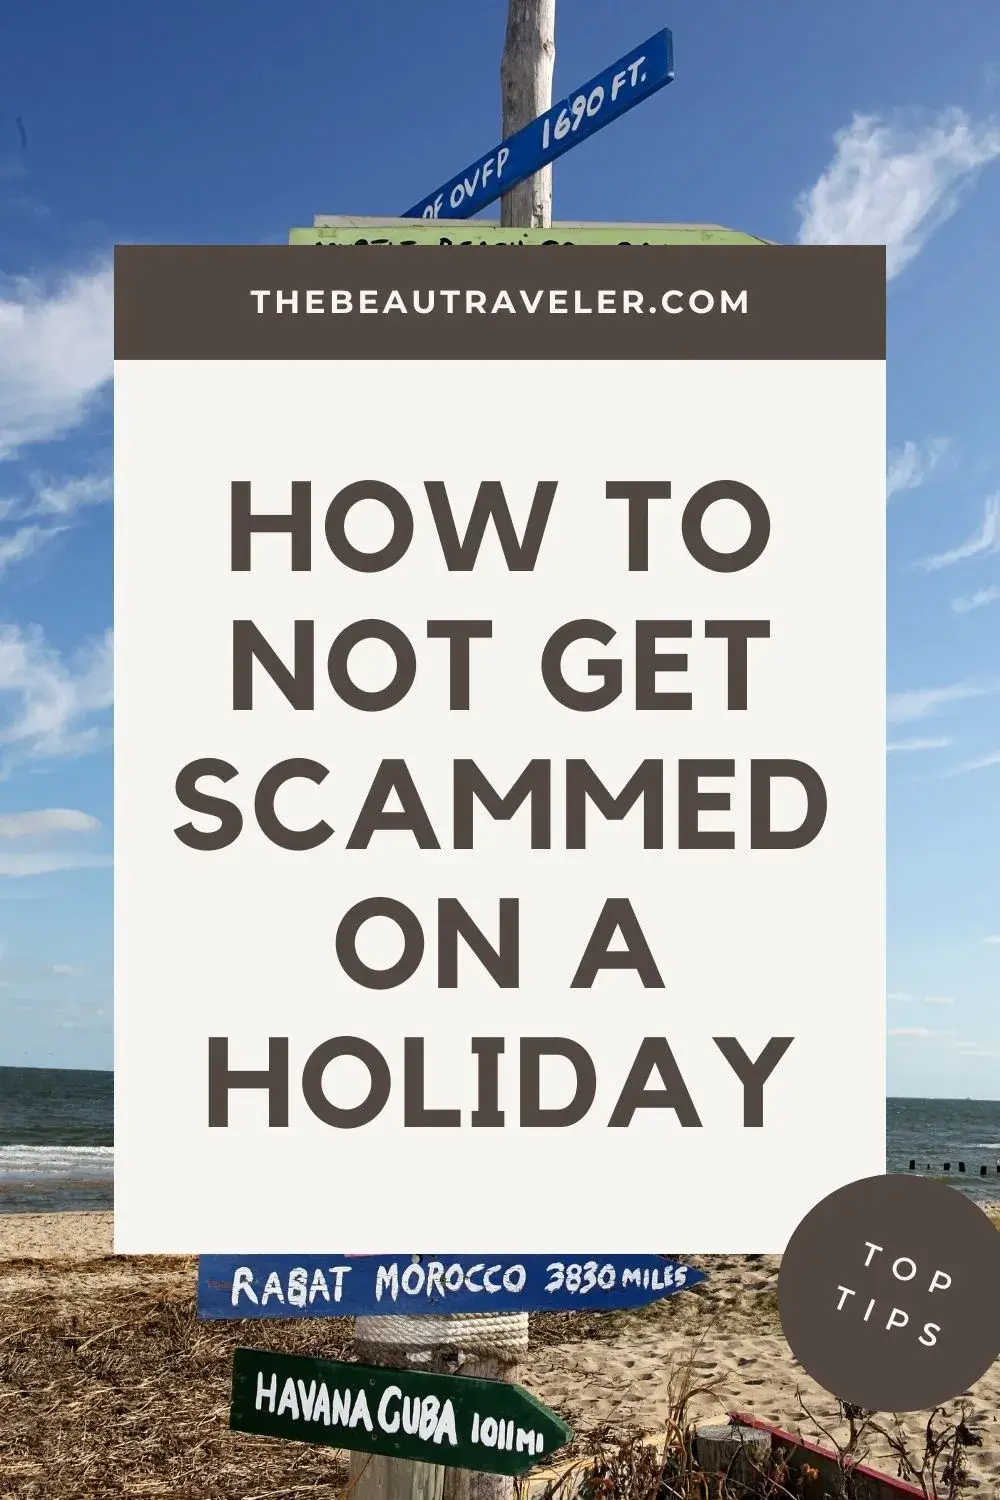 How to Not Get Scammed While on Vacation - The BeauTraveler